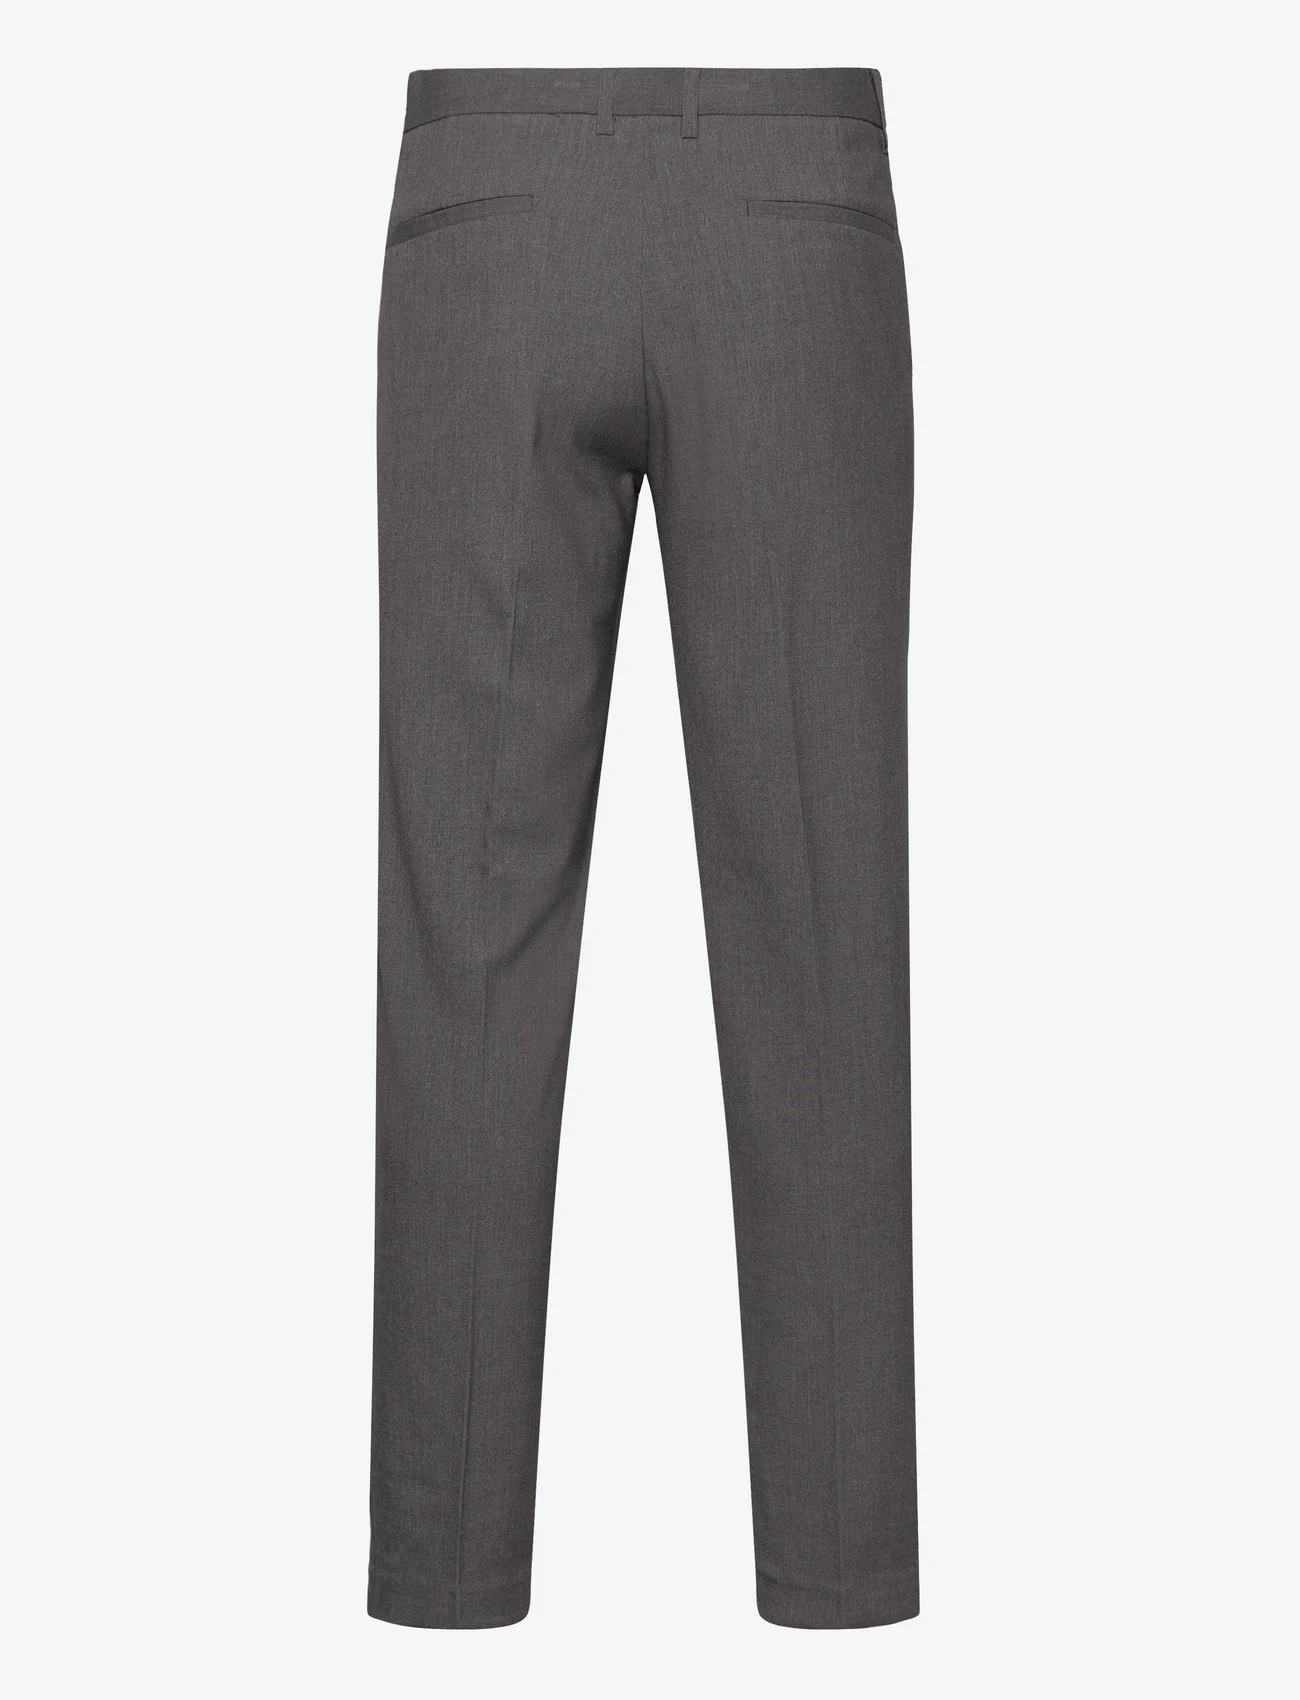 Lindbergh - Relaxed fit formal pants - suit trousers - grey mix - 1